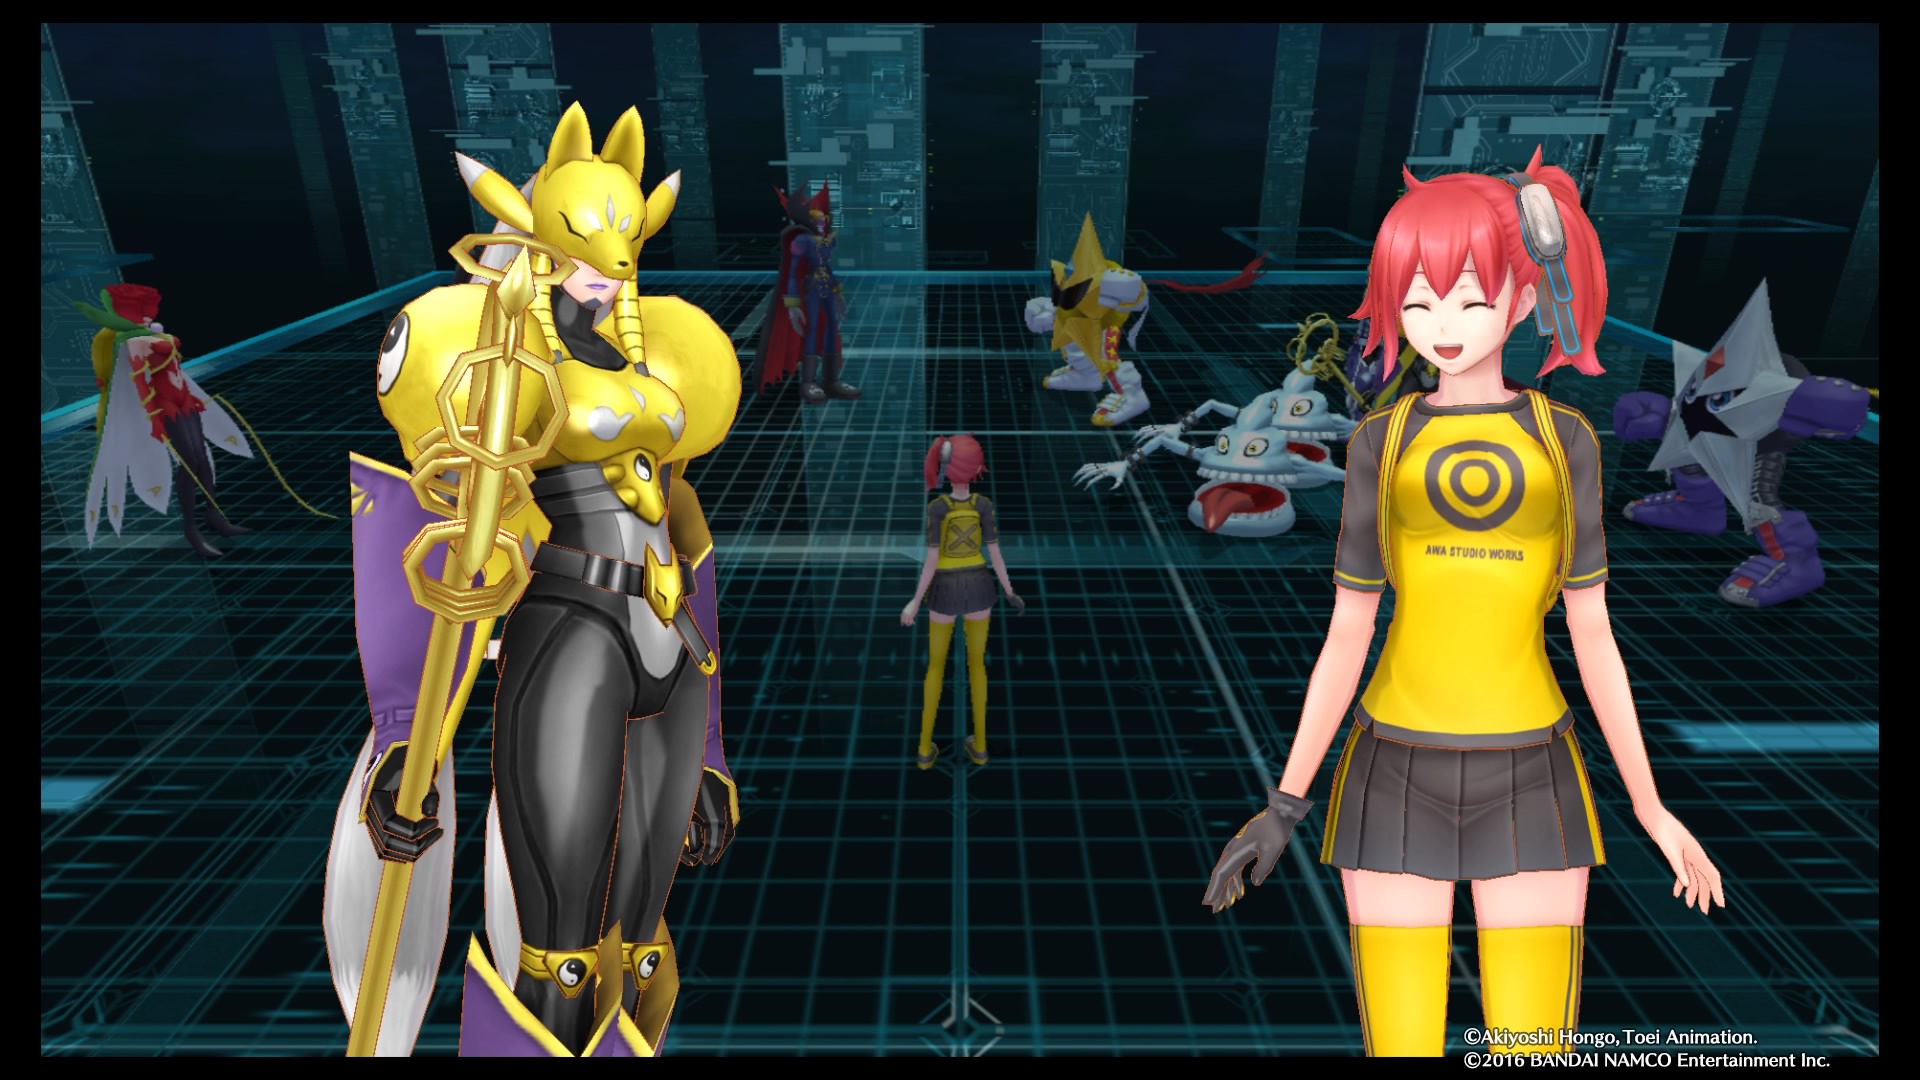 Digimon Cyber Sleuth Is One Of The Best Games I’ve Played In 2016